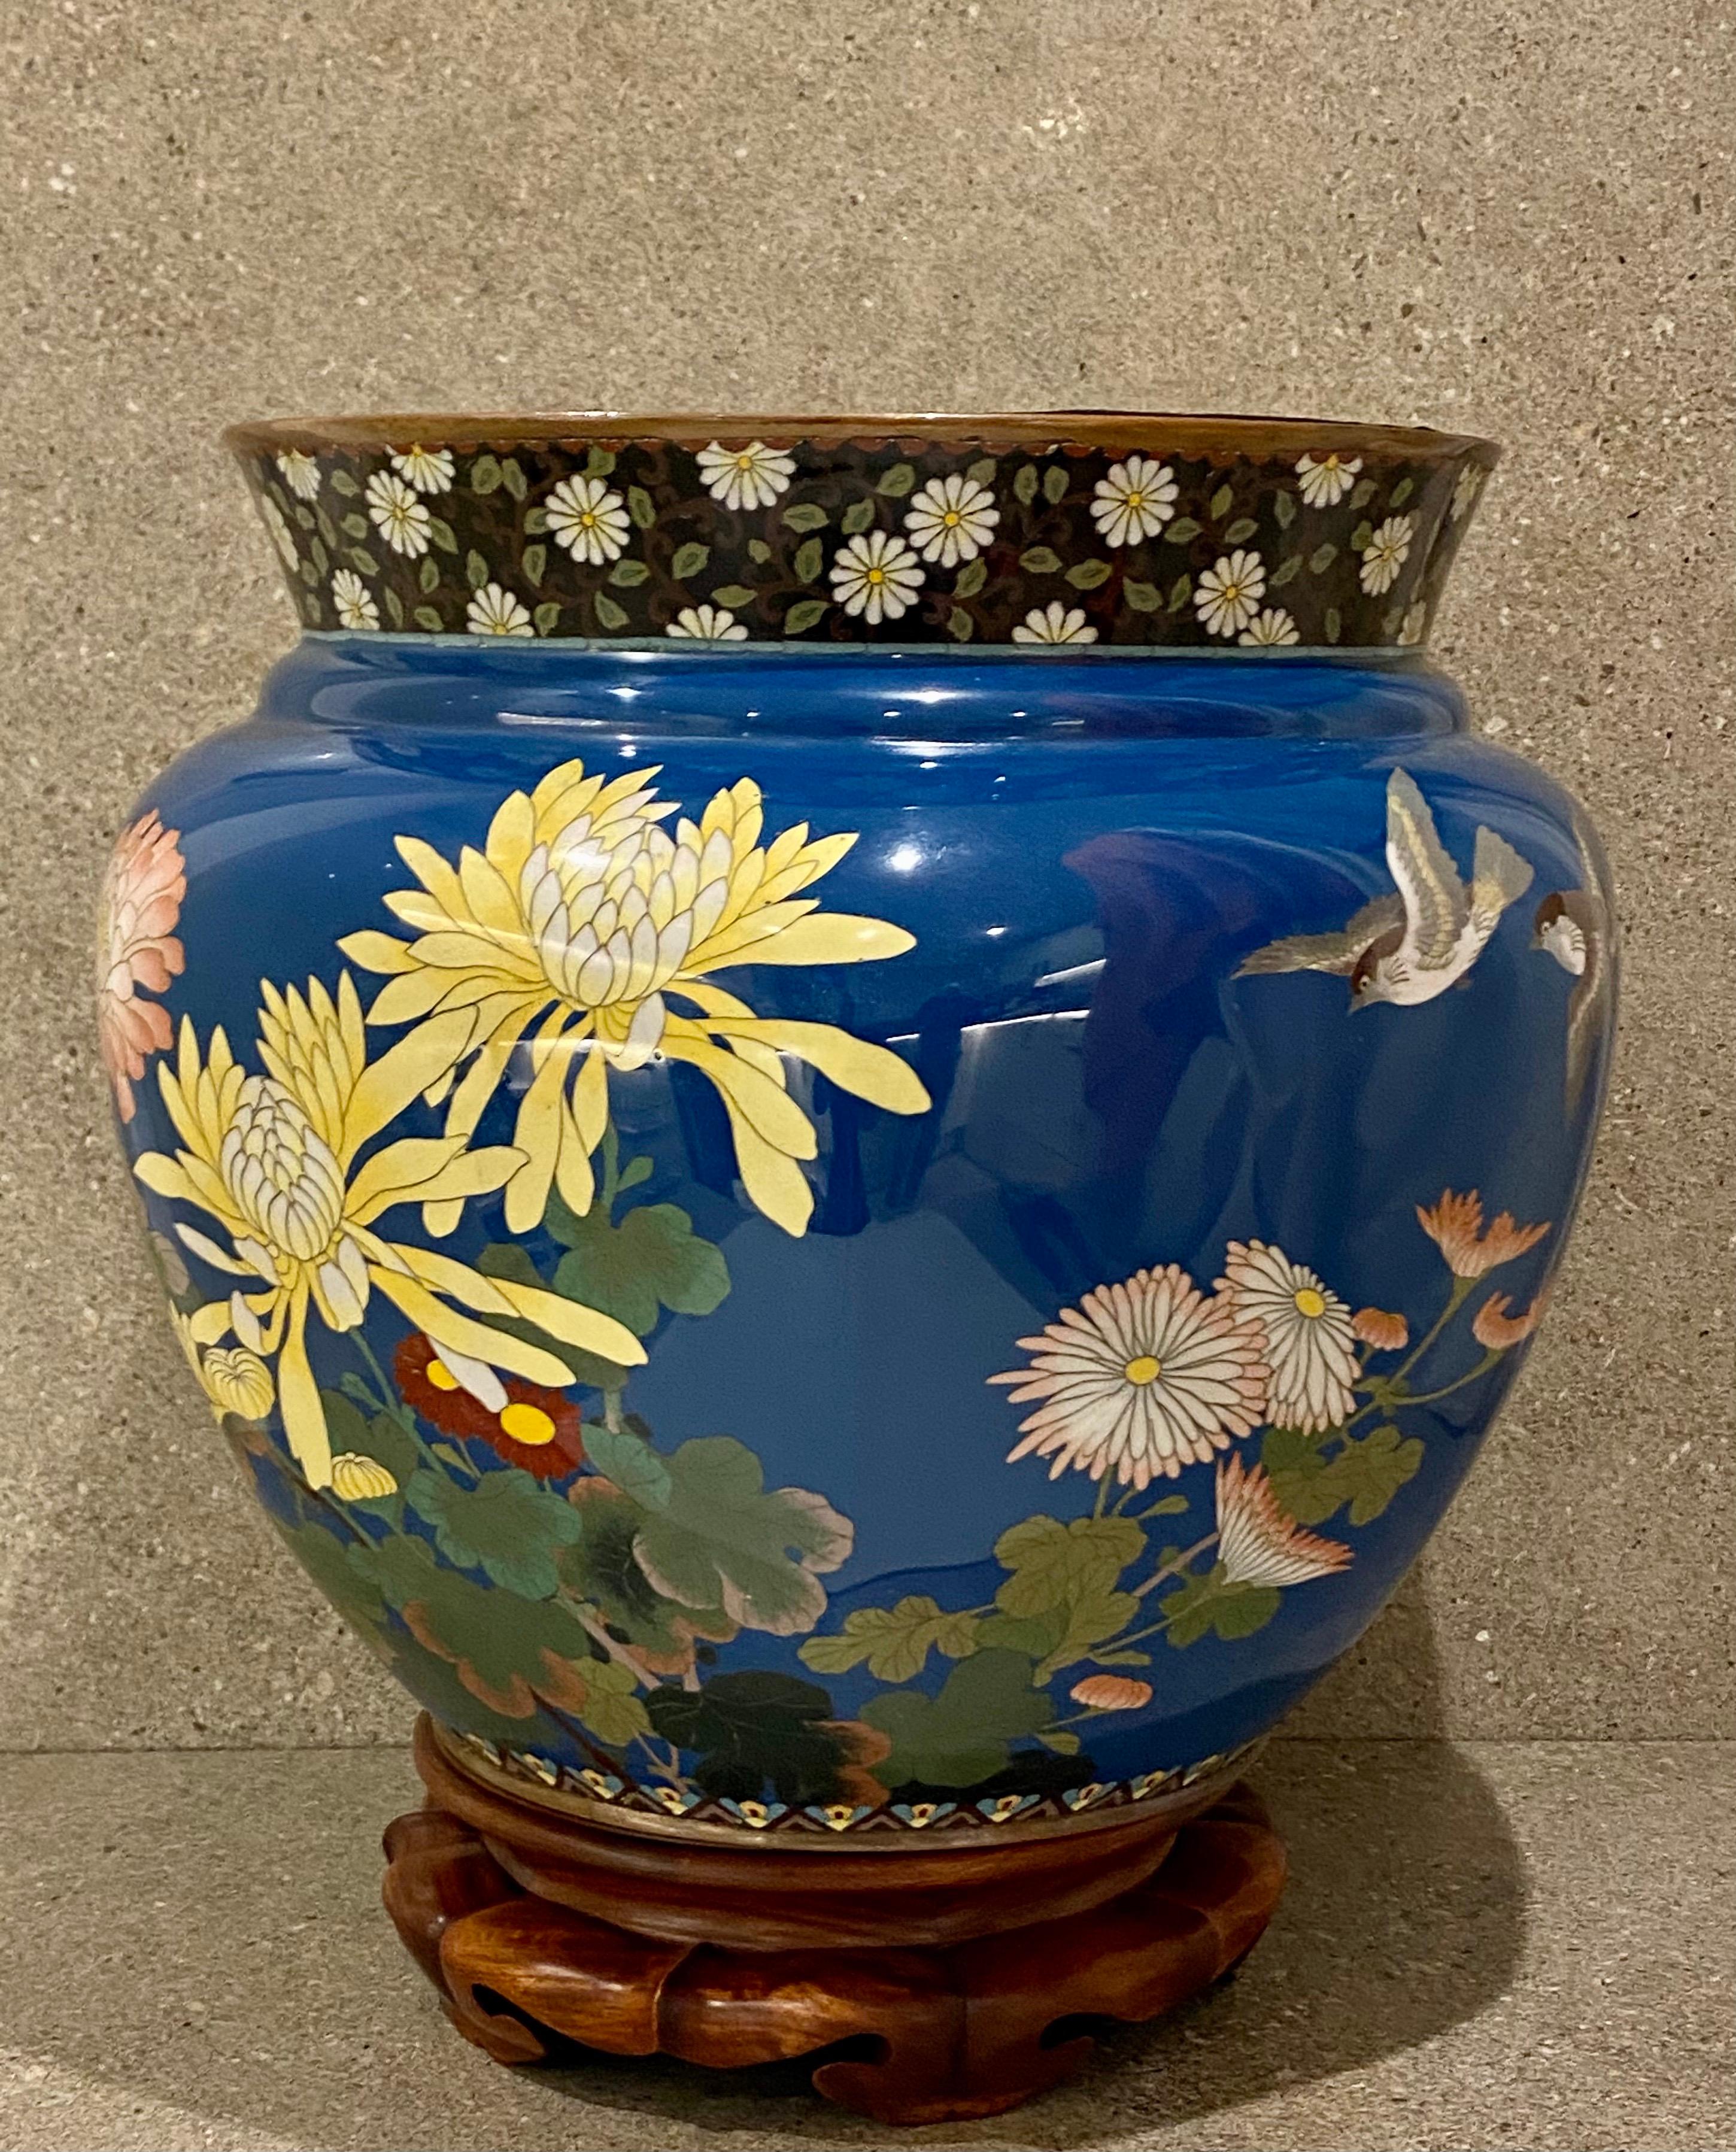 A Large Cloisonne Jardiniere, decorated with flowers and birds on a blue ground,
A very high quality colourful piece that looks amazing displayed.
This is has been well cherished since the late 19th century and is presented 
in immaculate